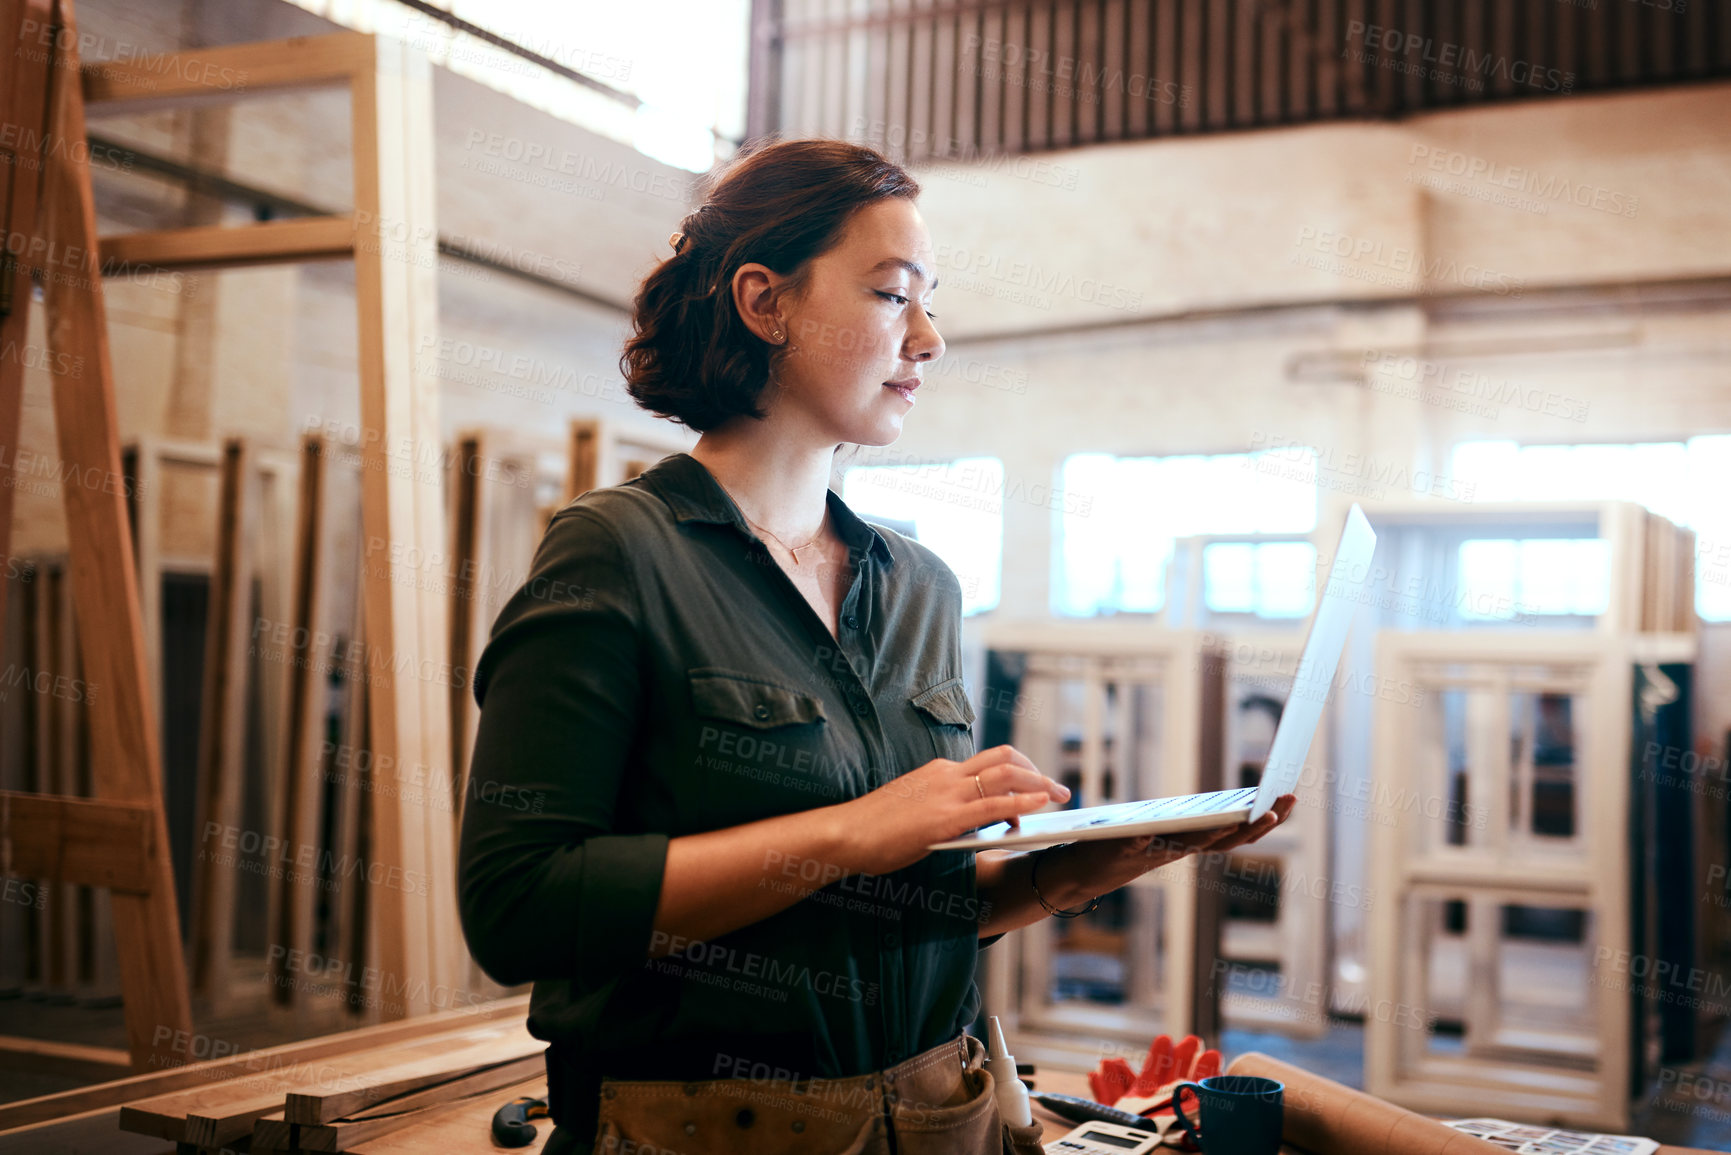 Buy stock photo Shot of a female carpenter using a laptop in her workshop